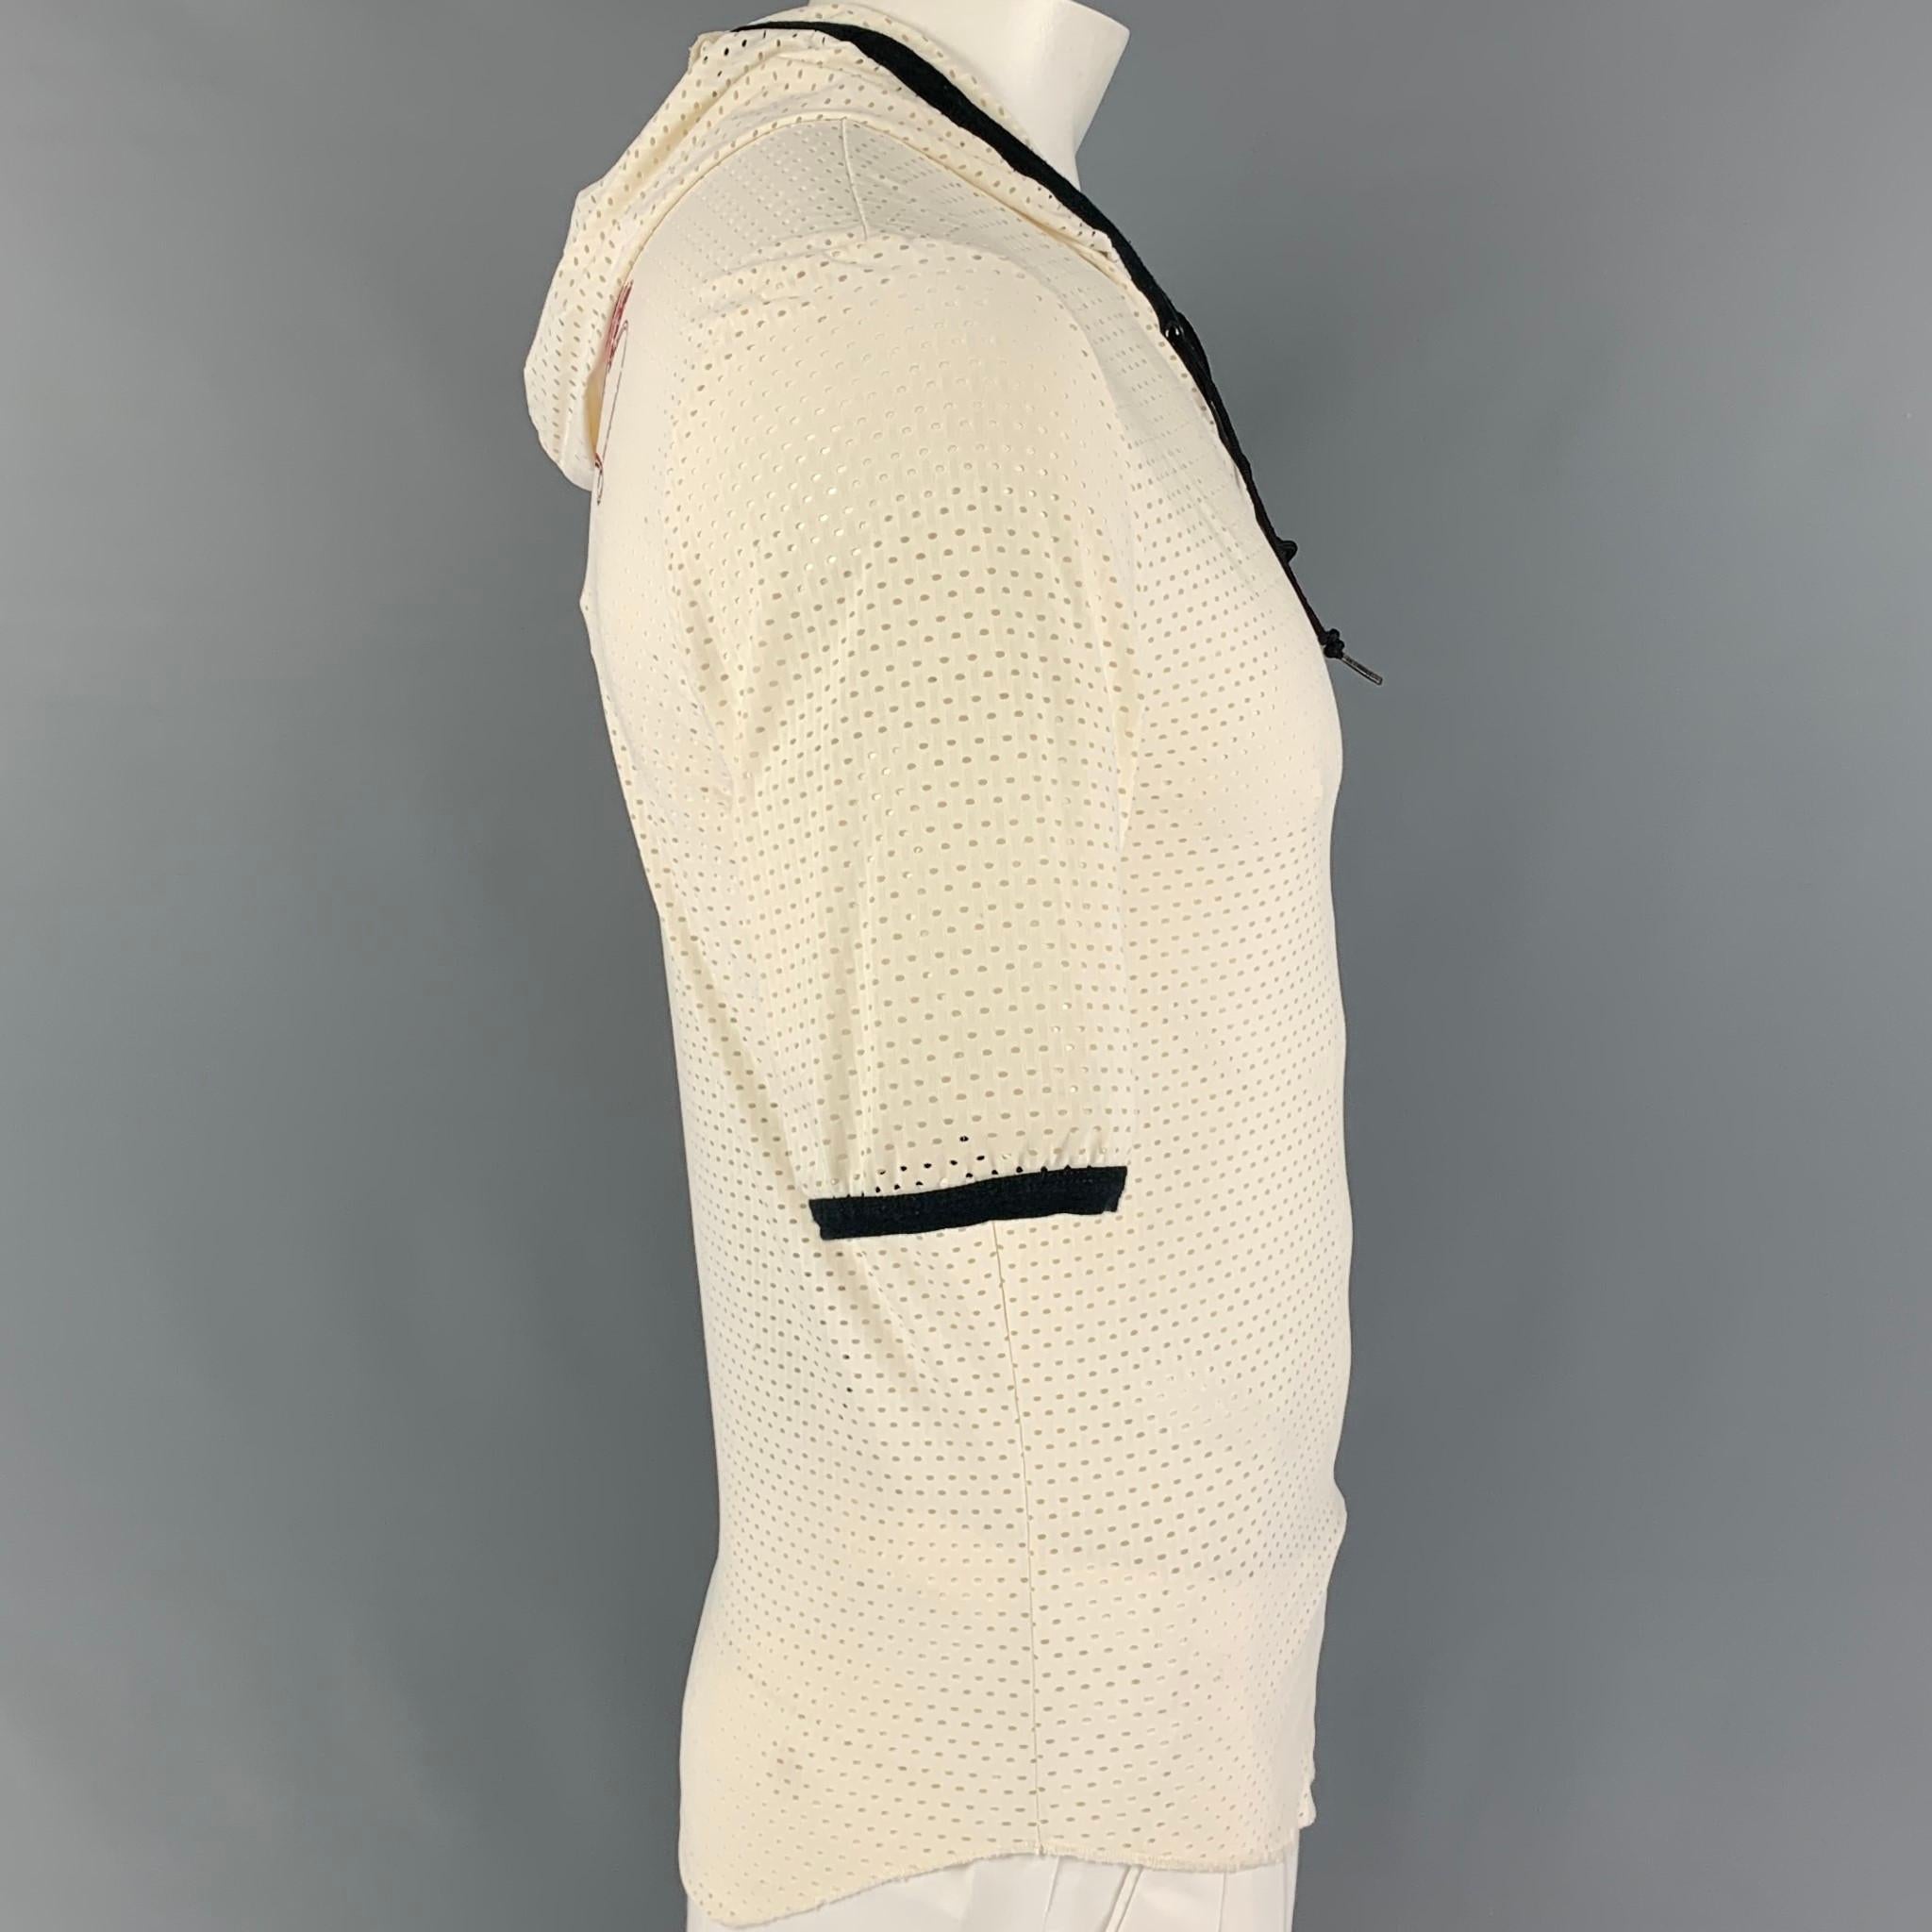 JEAN PAUL GAULTIER pullover comes in a cream perforated material featuring a hooded style, black trim,back print design, and a front self-tie design. Made in Italy. 

Very Good Pre-Owned Condition.
Marked: XL

Measurements:

Shoulder: 18 in.
Chest: